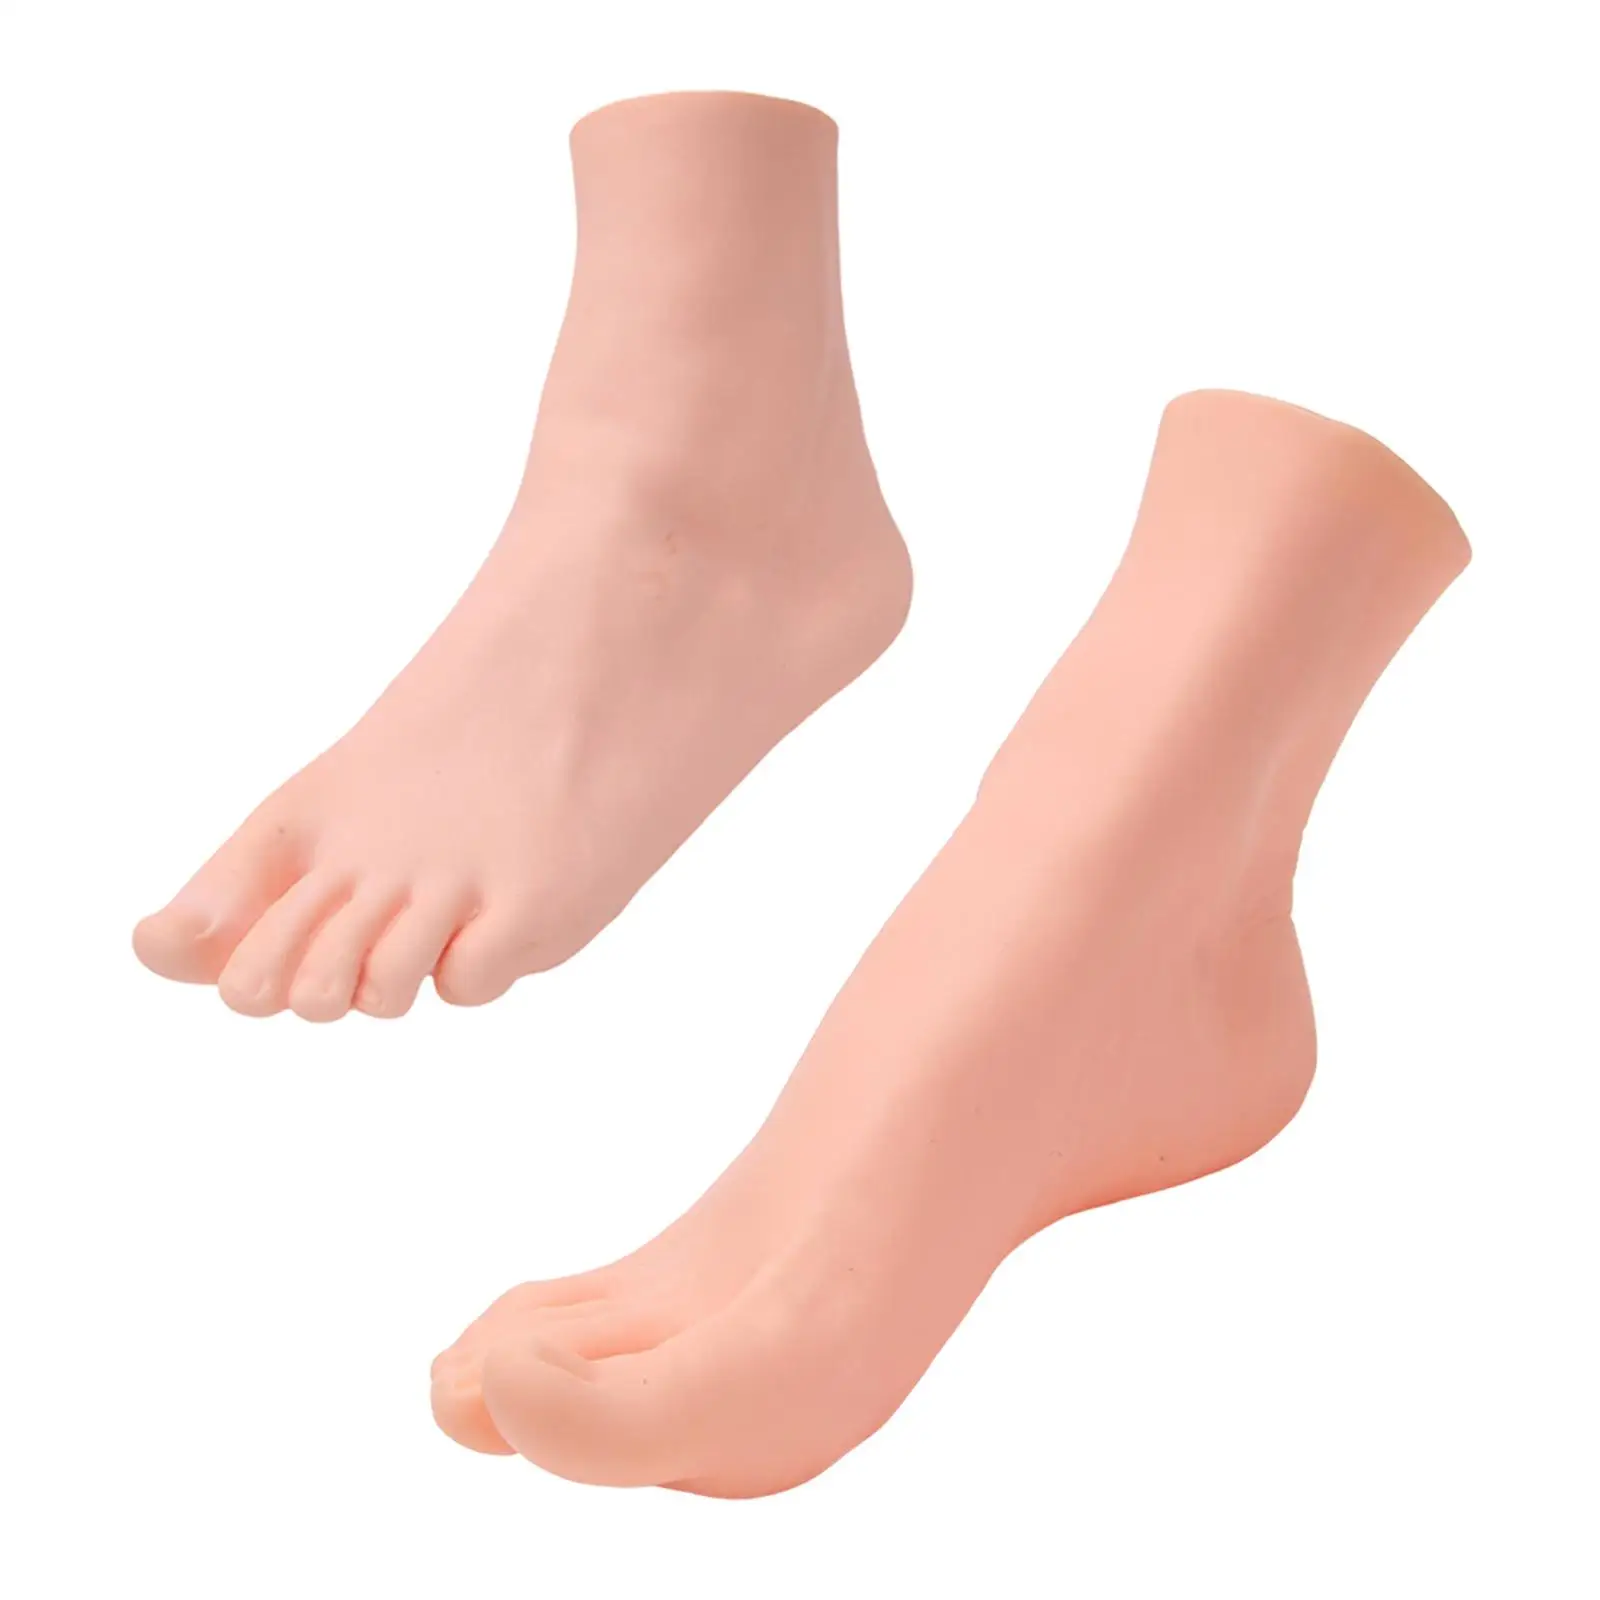 Soft Lifesize Female Mannequin Foot Jewerly Sandal Shoe Sock Display Shoes Display